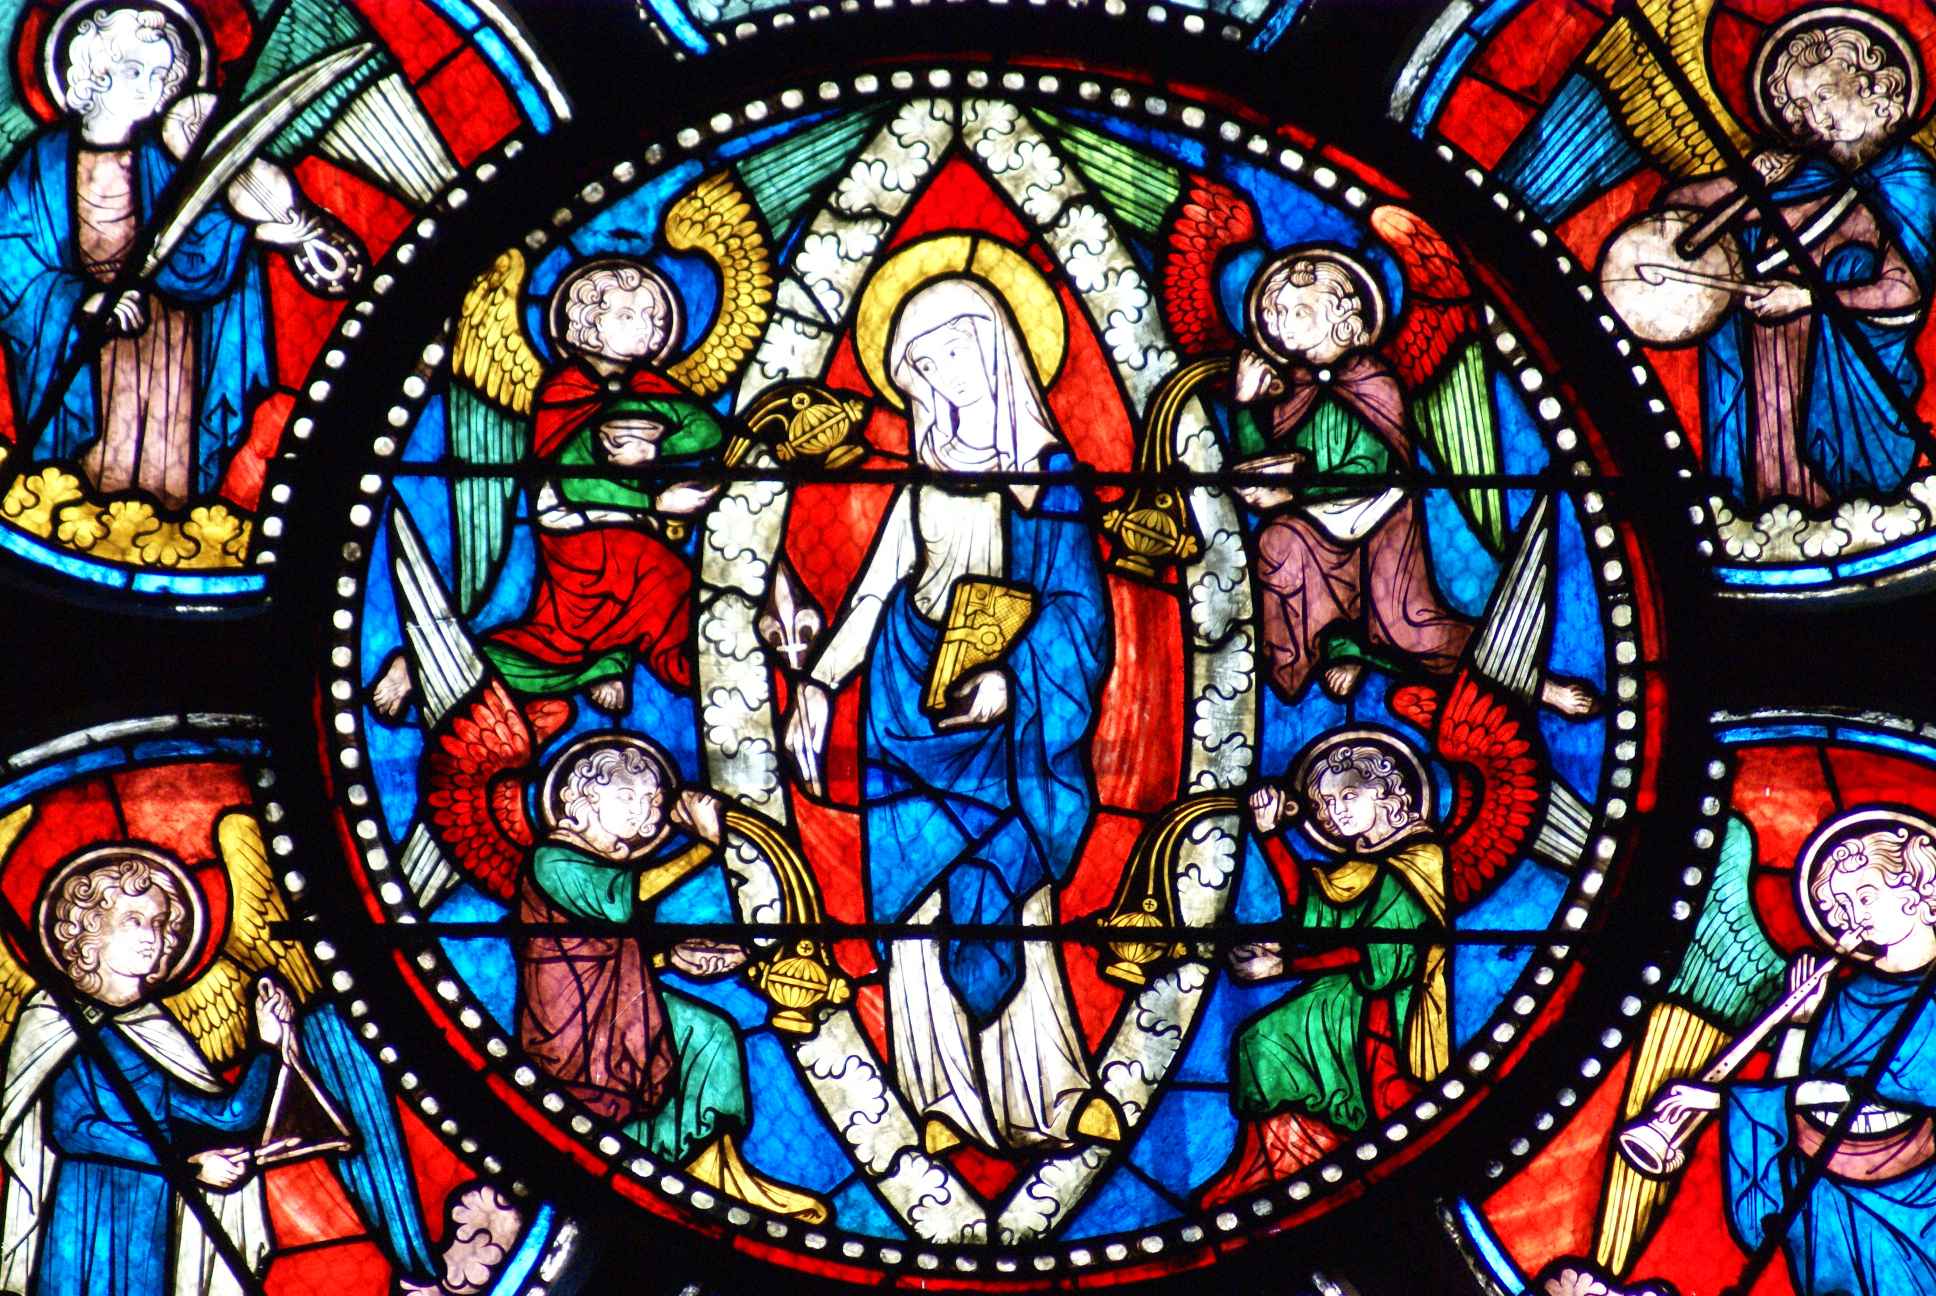 Stained Glass Art Window Religion F Wallpaper Background